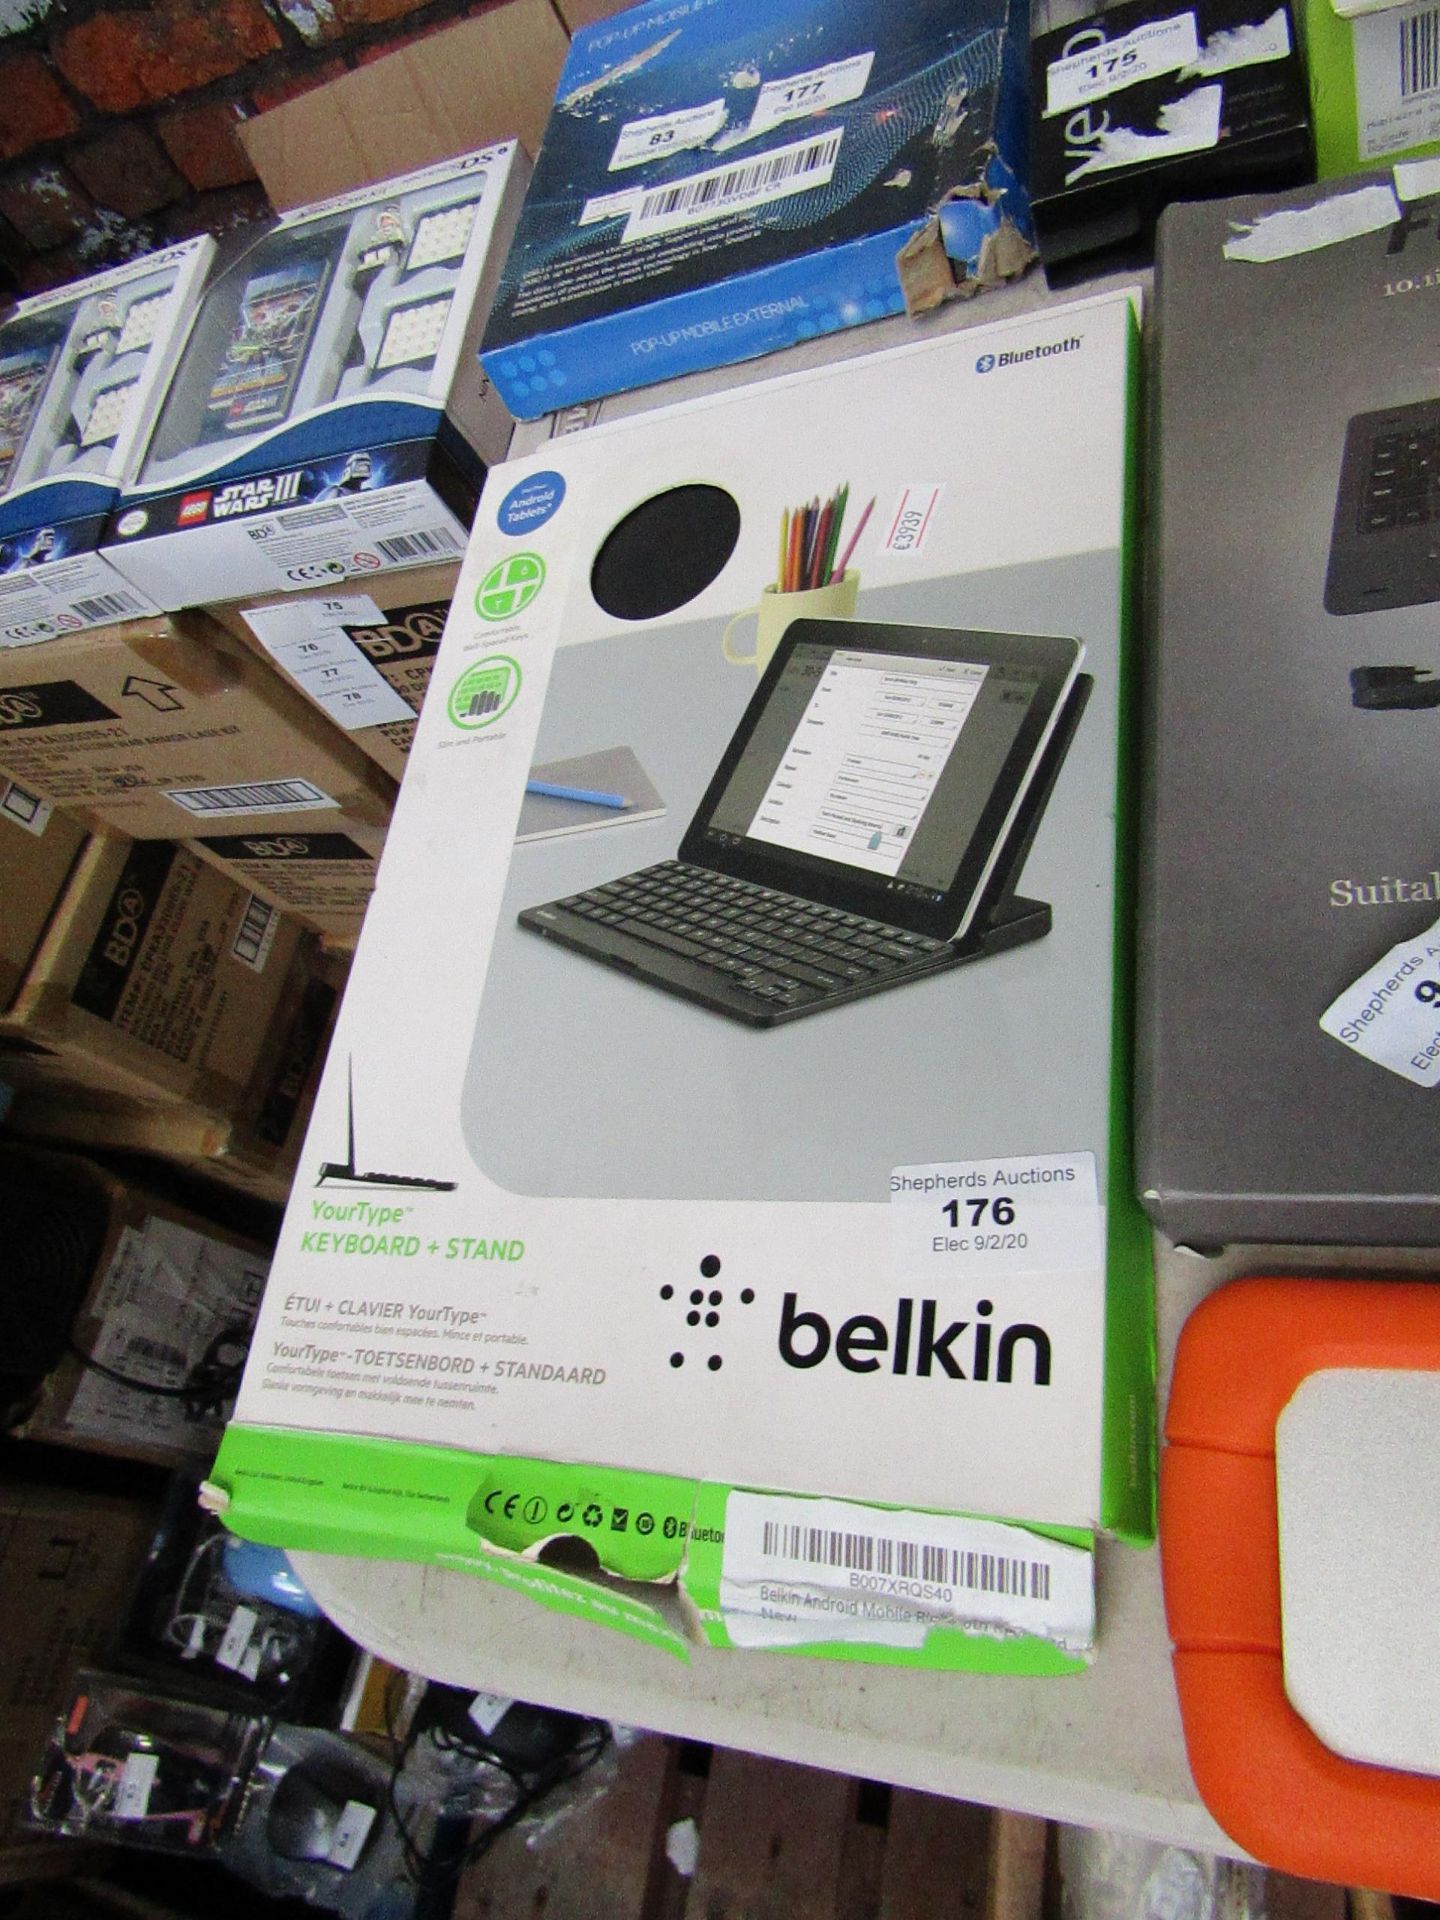 Belkin - YourType Keyboard + Stand - Untested and boxed.